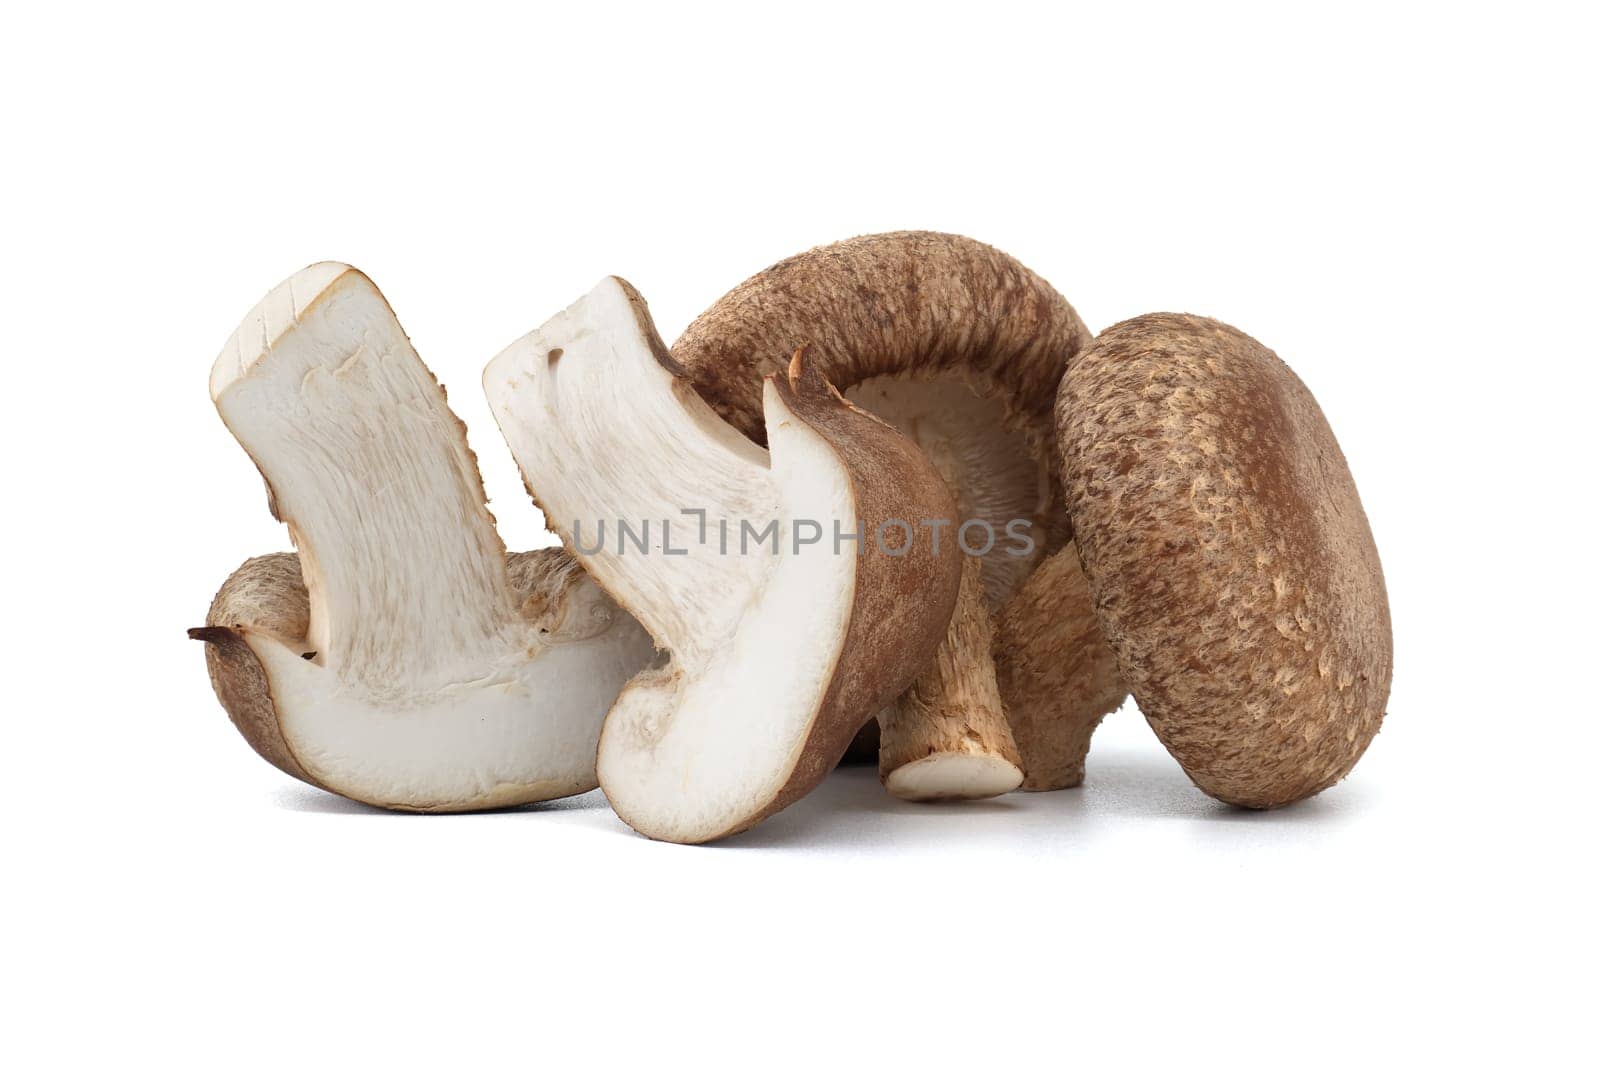 Fresh shiitake mushrooms, known for their health benefits and pharmacological properties, are isolated on a white background